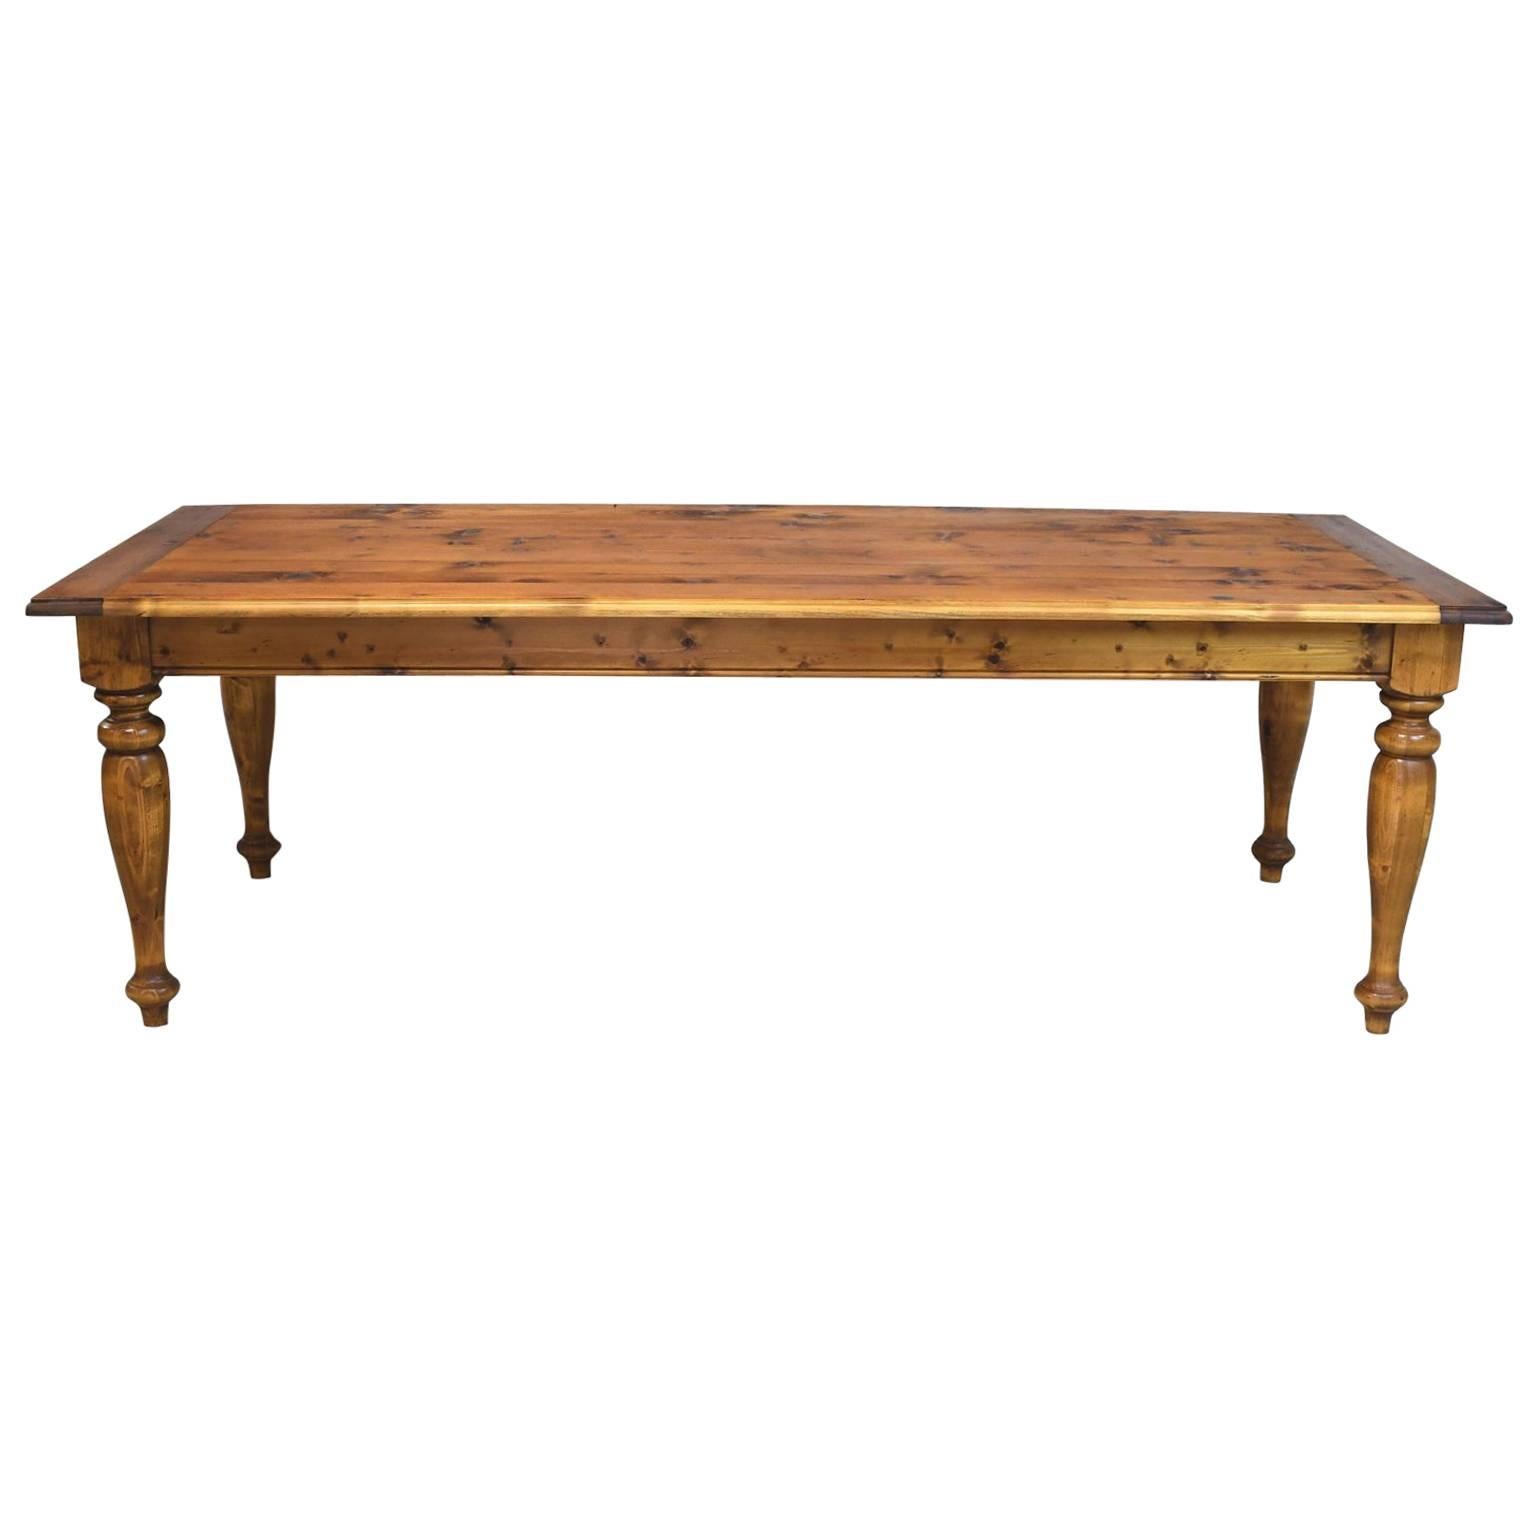 8' Long European Country Farmhouse Dining or Kitchen Table in Pine, circa 1990s